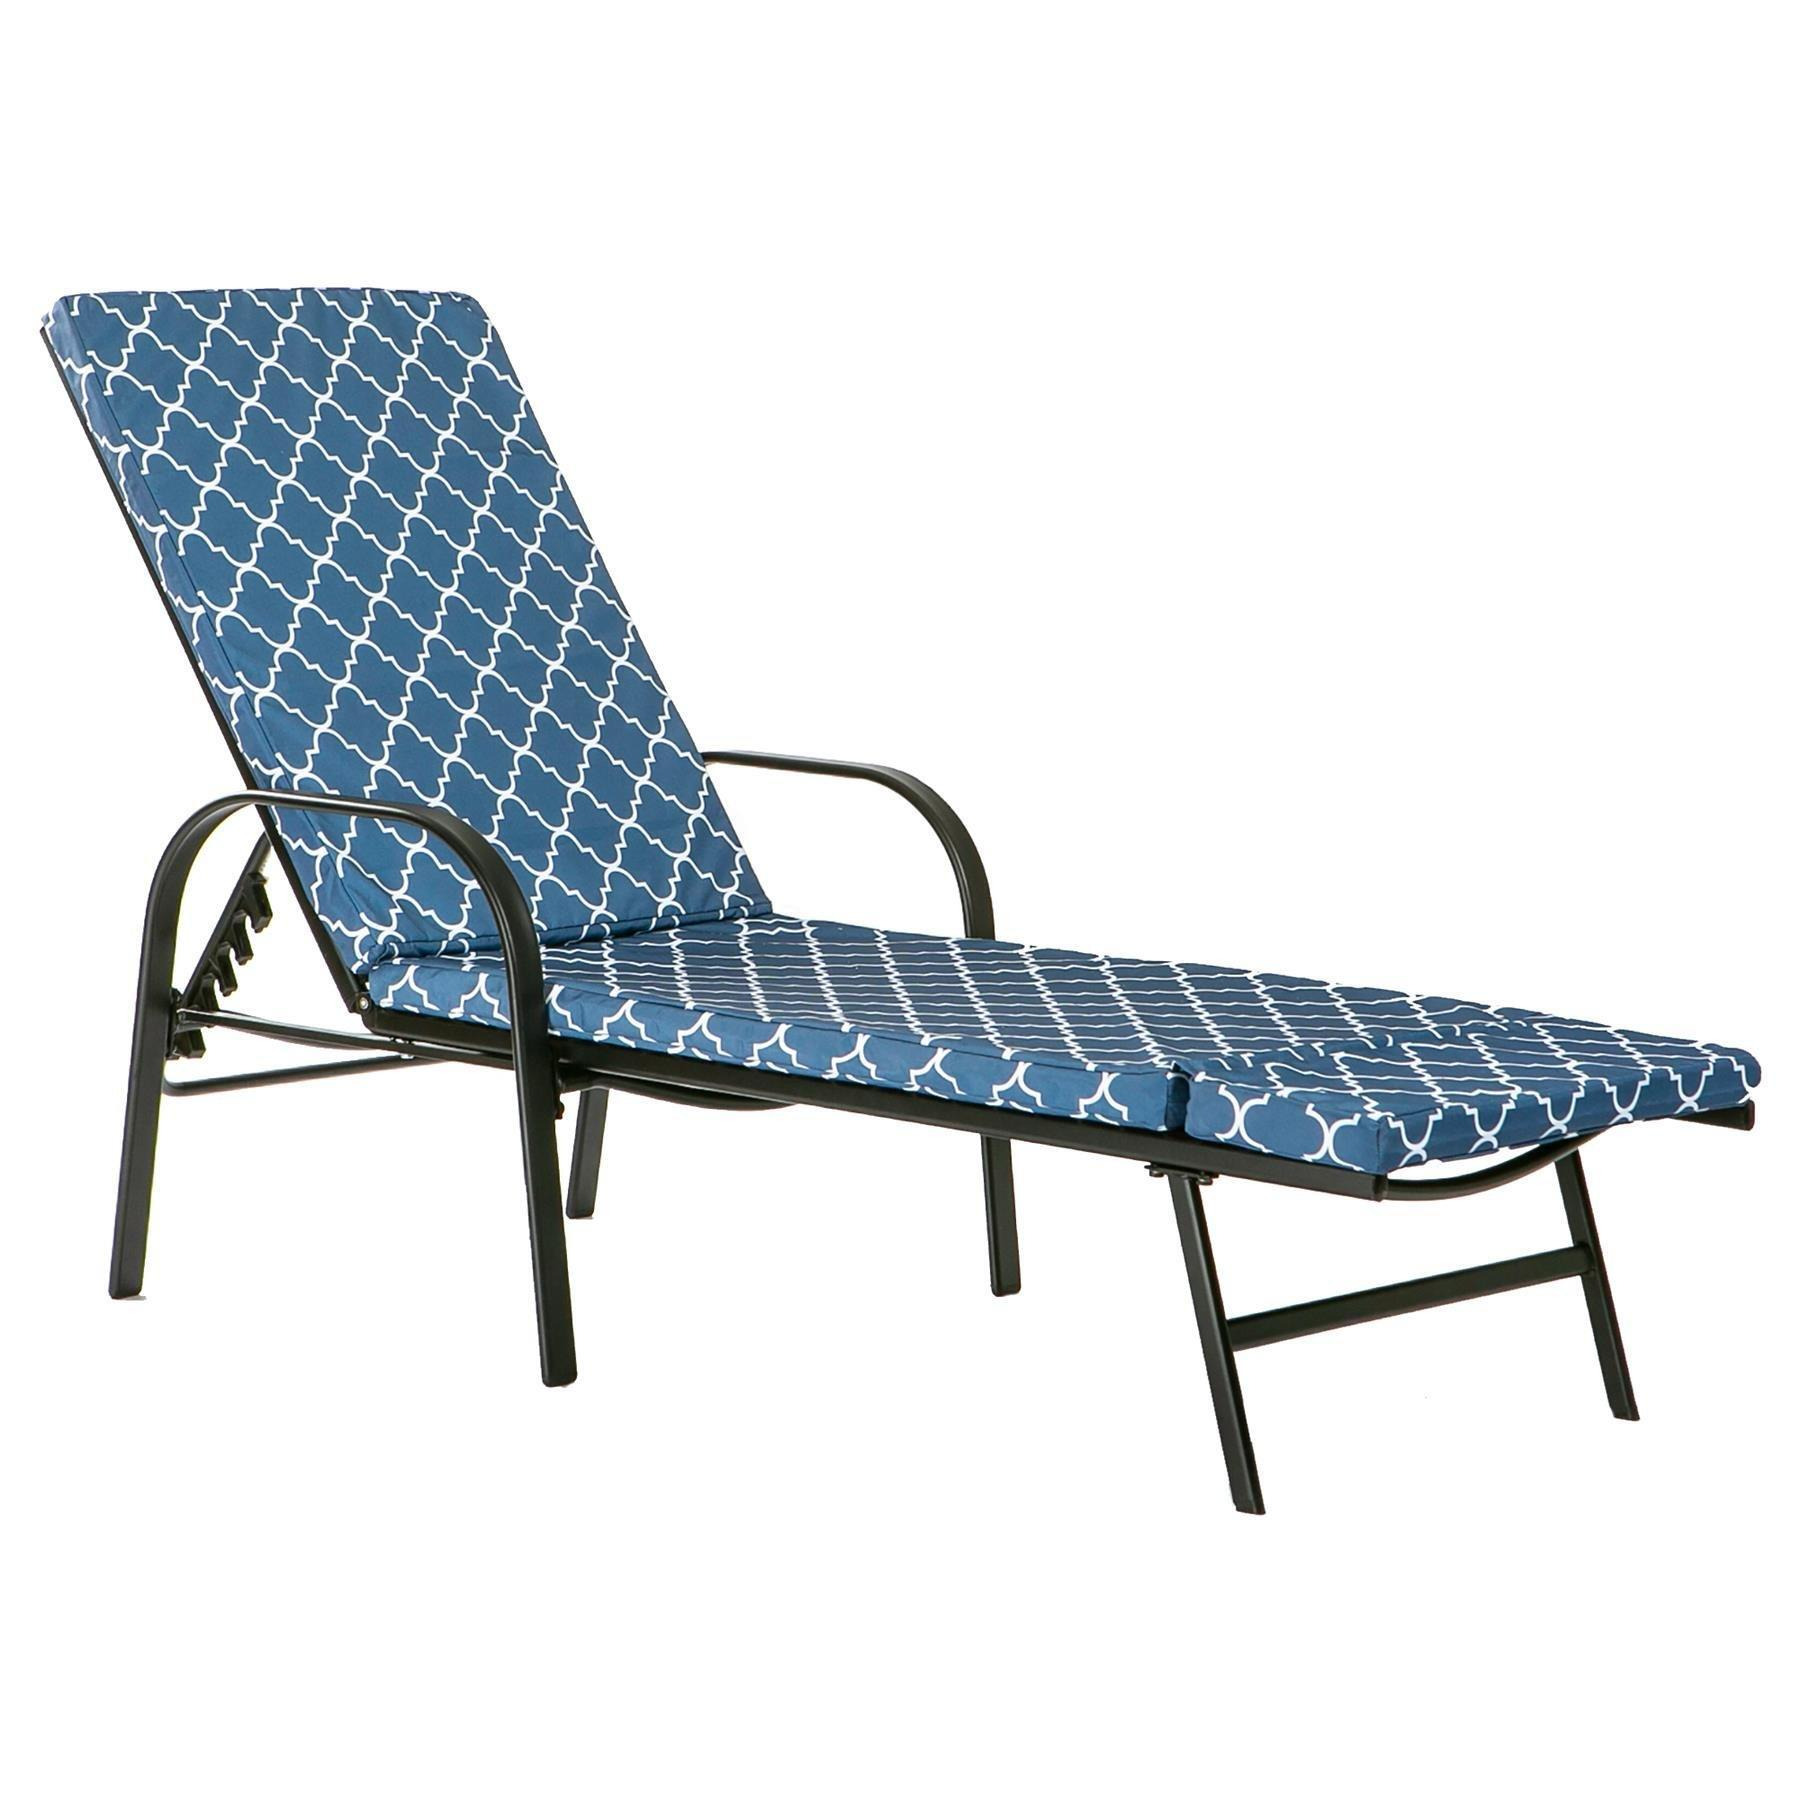 Sussex Sun Lounger & Cushion Set Black/Navy Moroccan - image 1